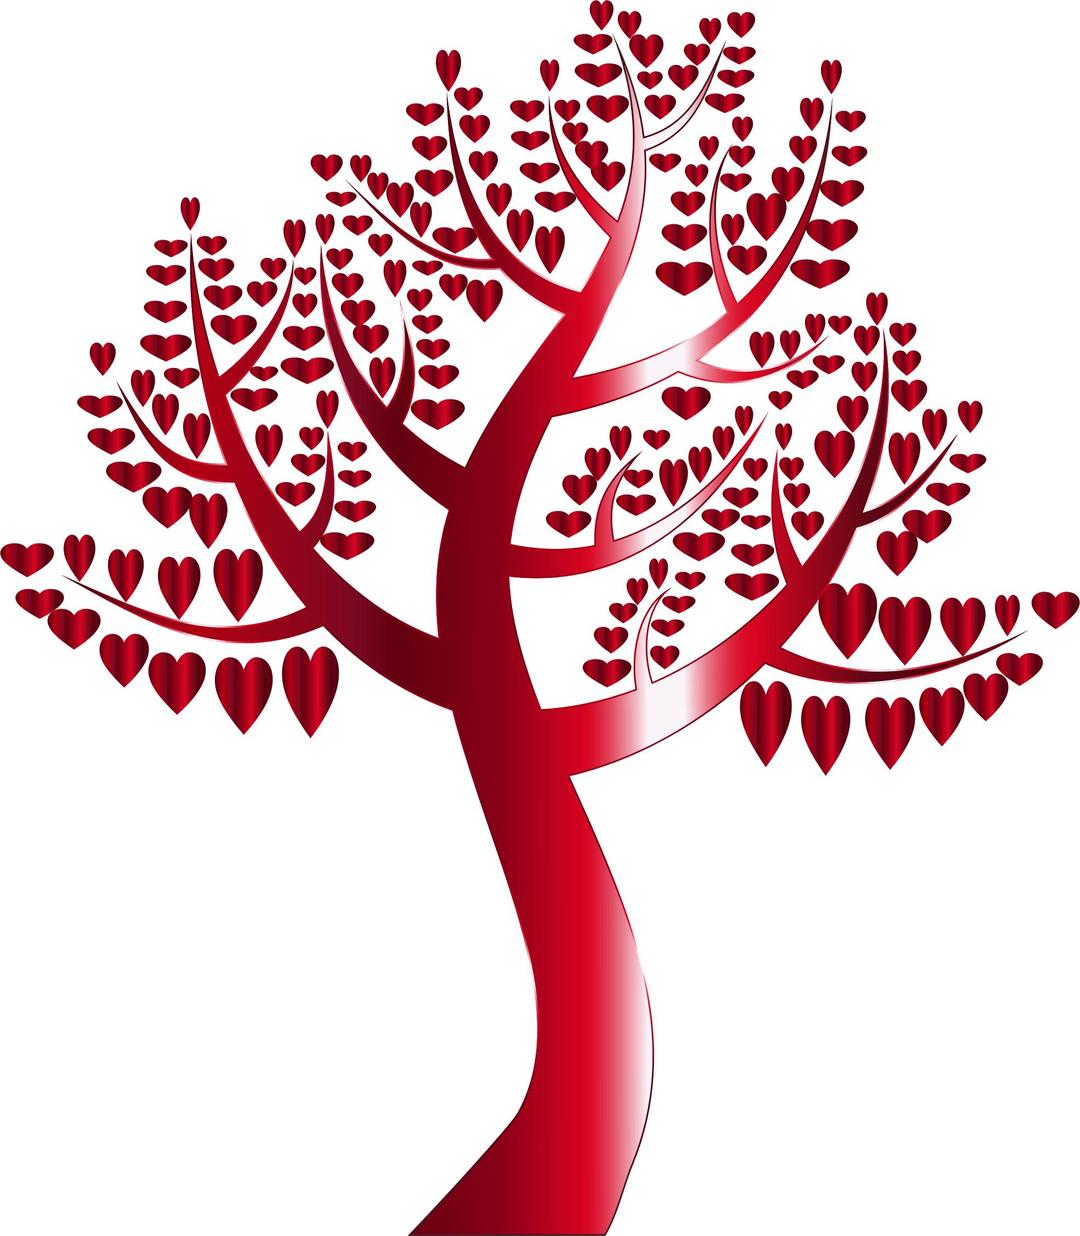 Simple Hearts Tree 11 No Background png transparent